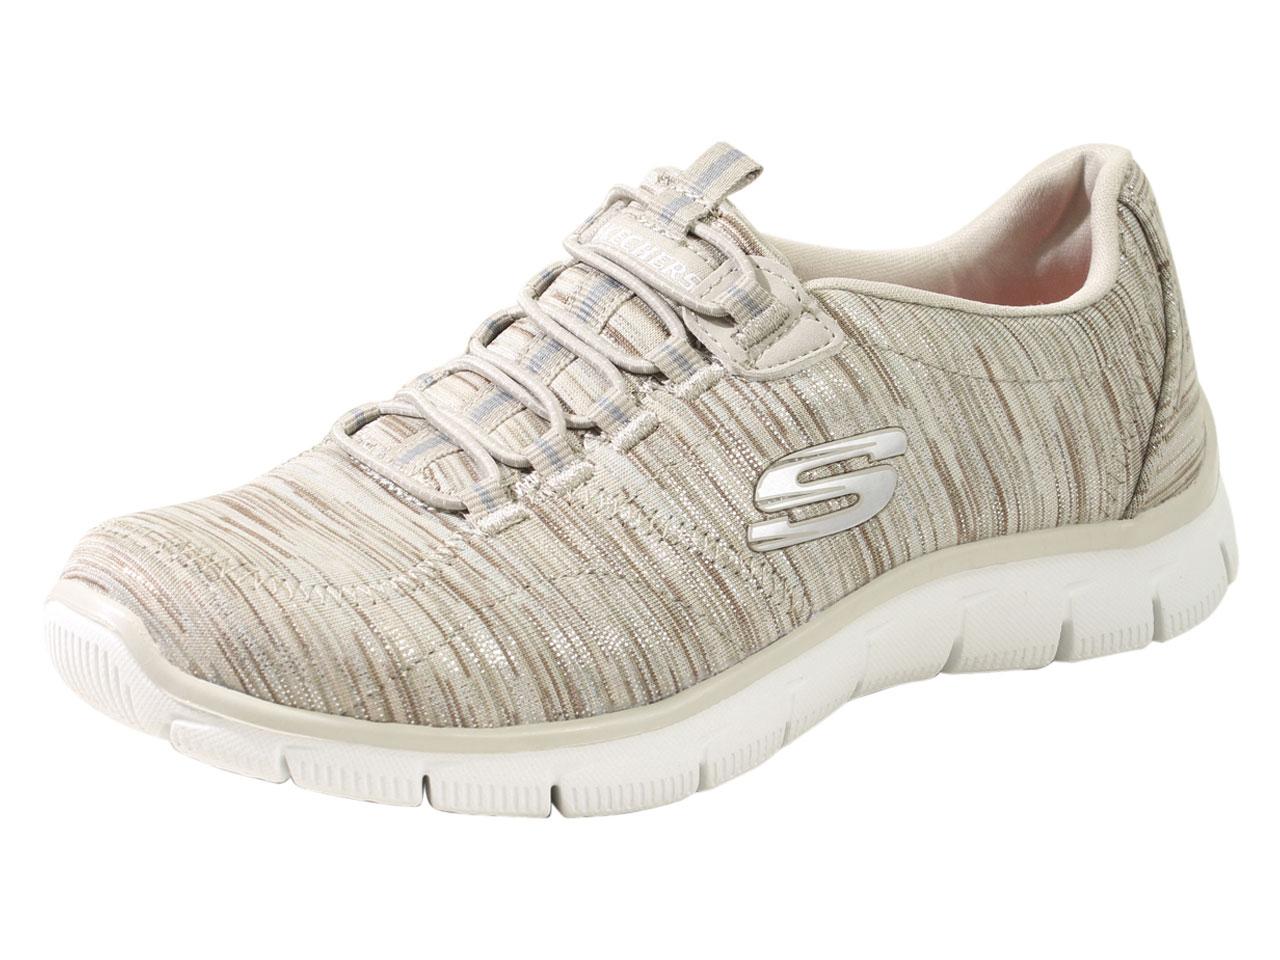 Skechers Women's Empire Game On Memory Foam Sneakers Shoes - Taupe - 8.5 B(M) US